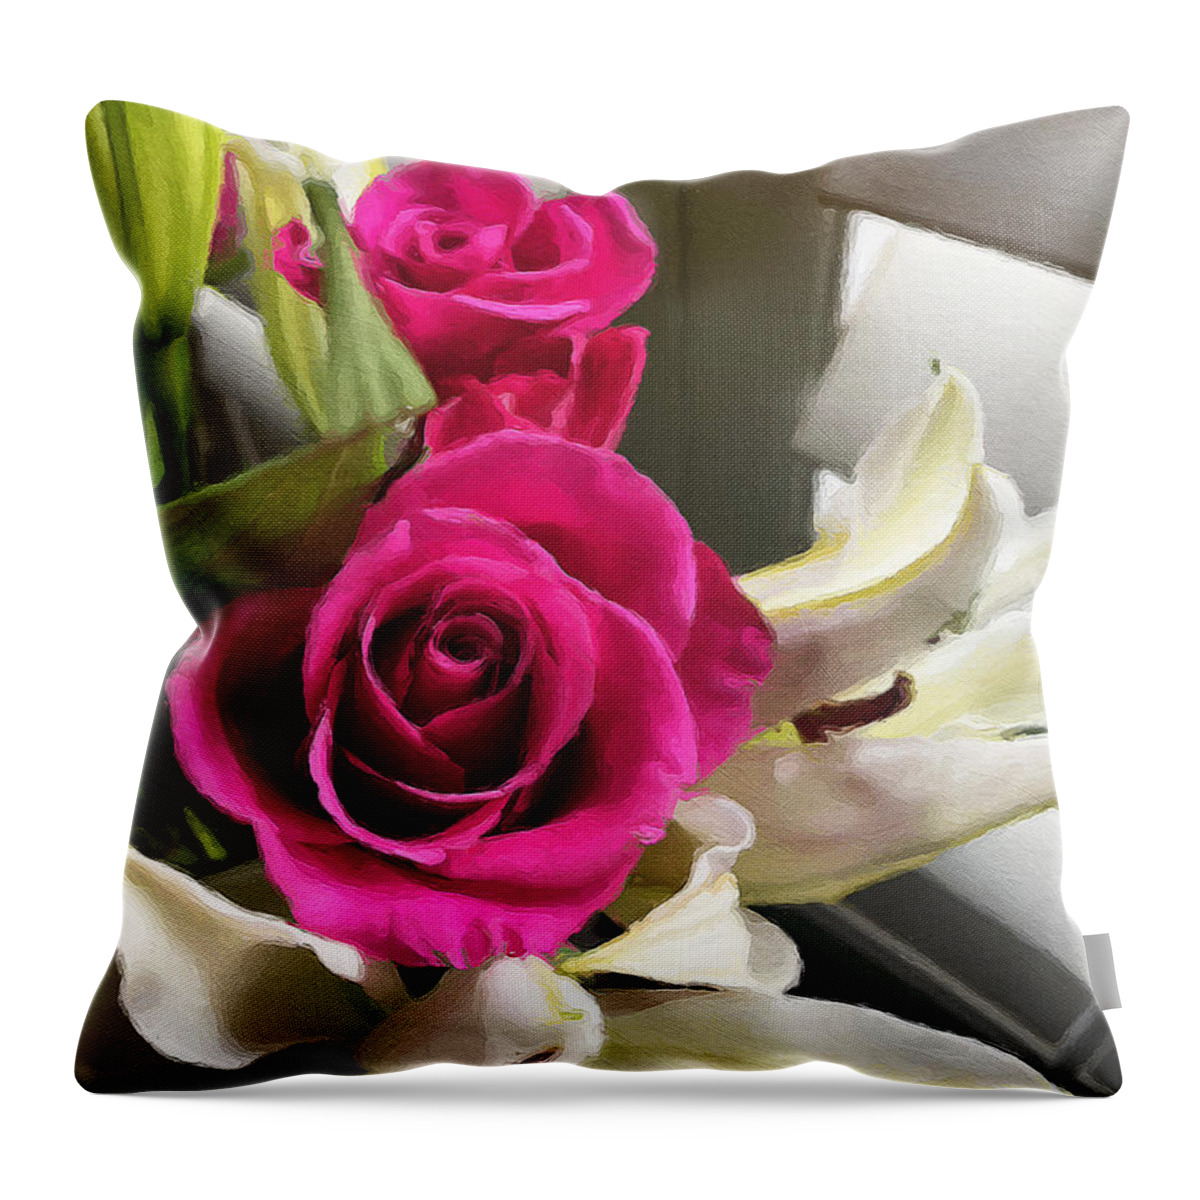 Roses Throw Pillow featuring the photograph Pink Roses by Brian Watt